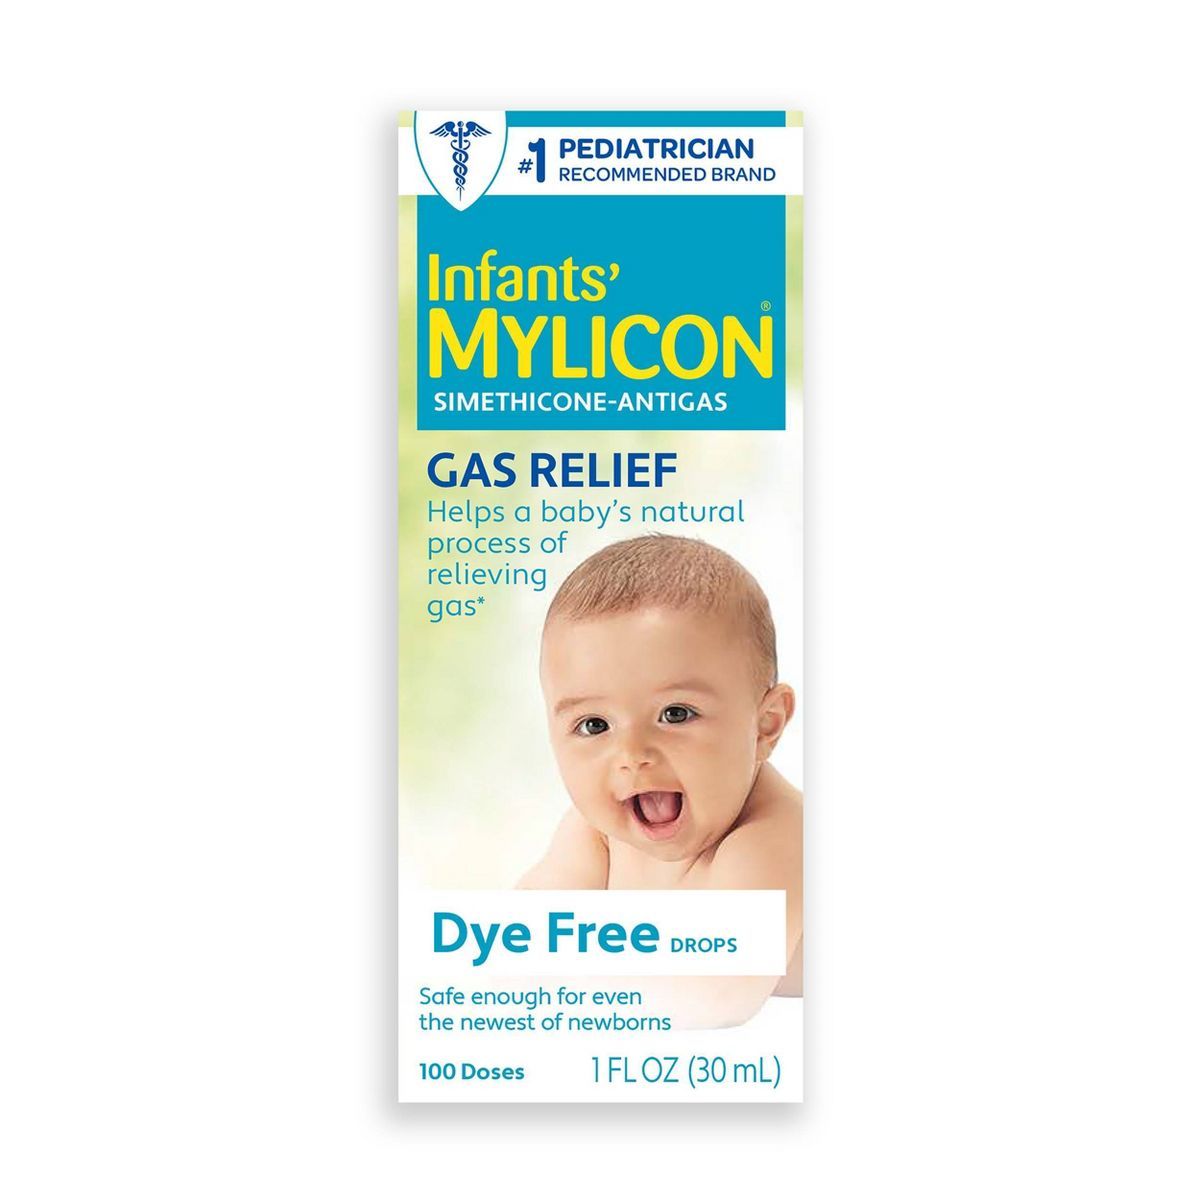 Mylicon Infant Gas Relief Colic Dye Free Drops - 1 fl oz | Target